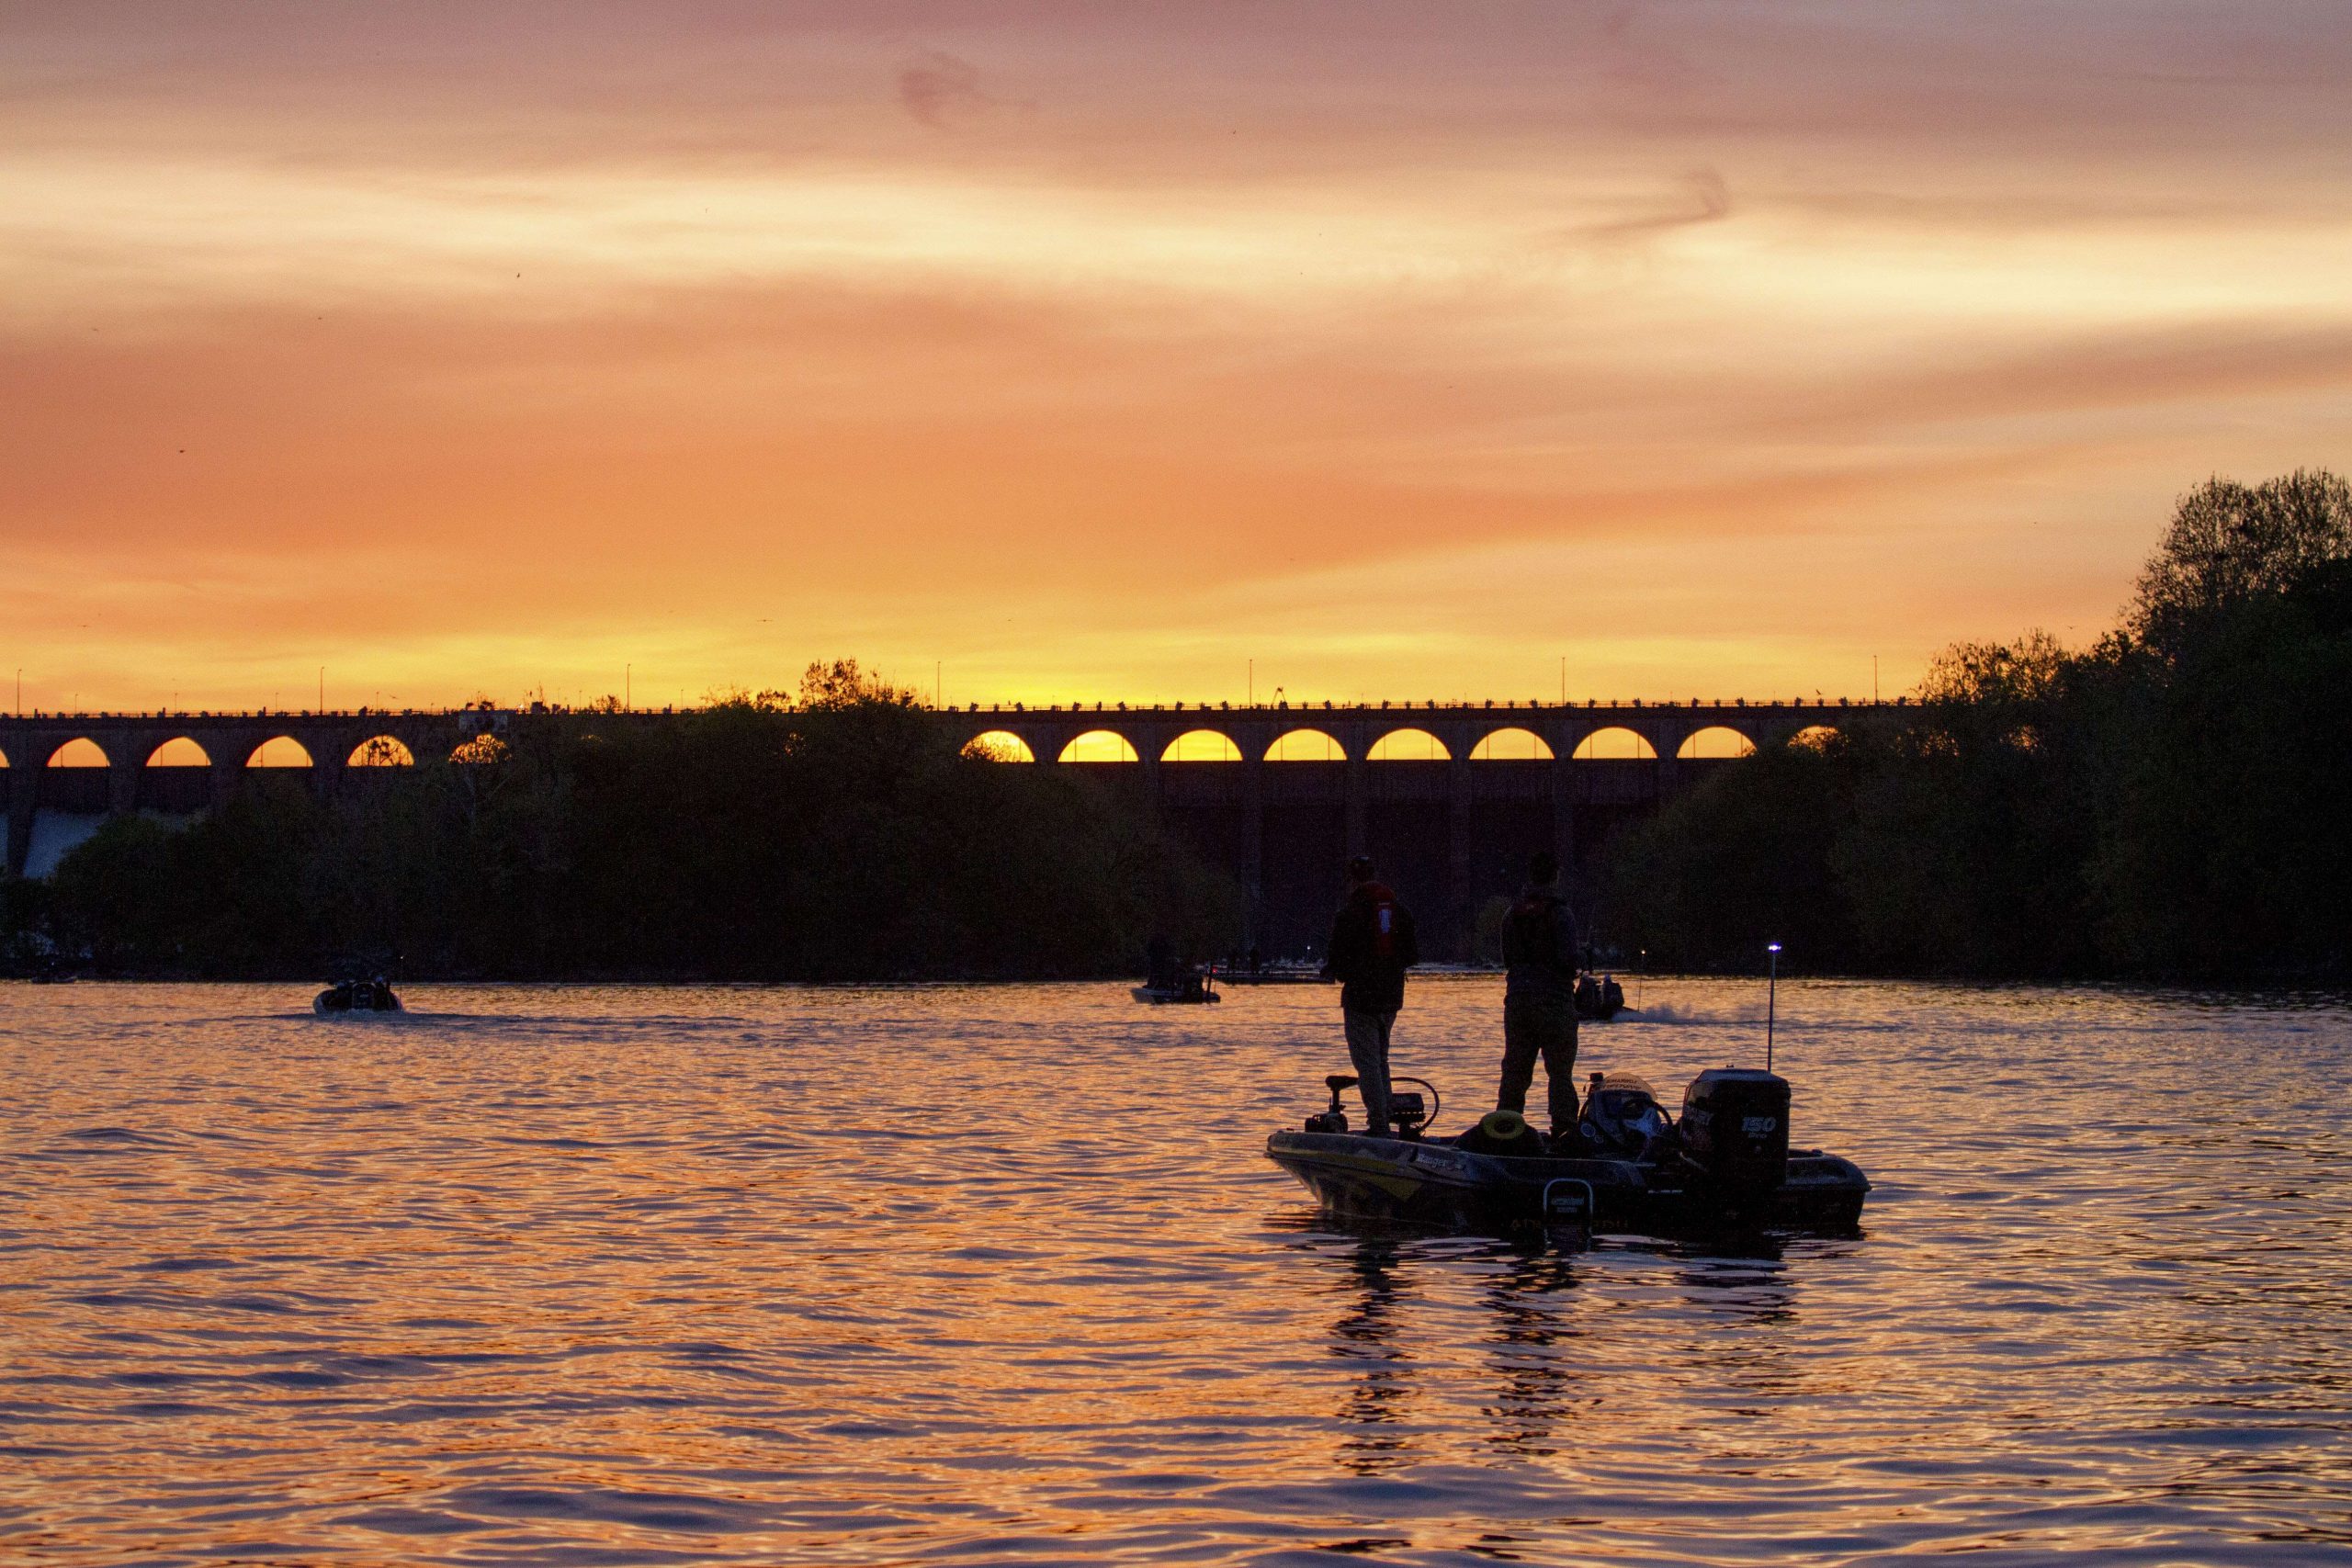 <h4>3. Pickwick Lake, Alabama/Mississippi/Tennessee</h4>[43,100 acres] <br> This border lake is not only easy on the eyes, but also offers anglers the opportunity to catch a trophy trifecta: smallmouth, largemouth and spotted bass of above-average size. When the Alabama Bass Trail visited here in February, the results were more than impressive. It took 27.79 pounds to earn the first-place check. And that team didnât run away with the win. Second place landed a five-fish limit weighing 27.16. The Top 20 all cracked 20 pounds, and a 7.66 earned big bass honors.